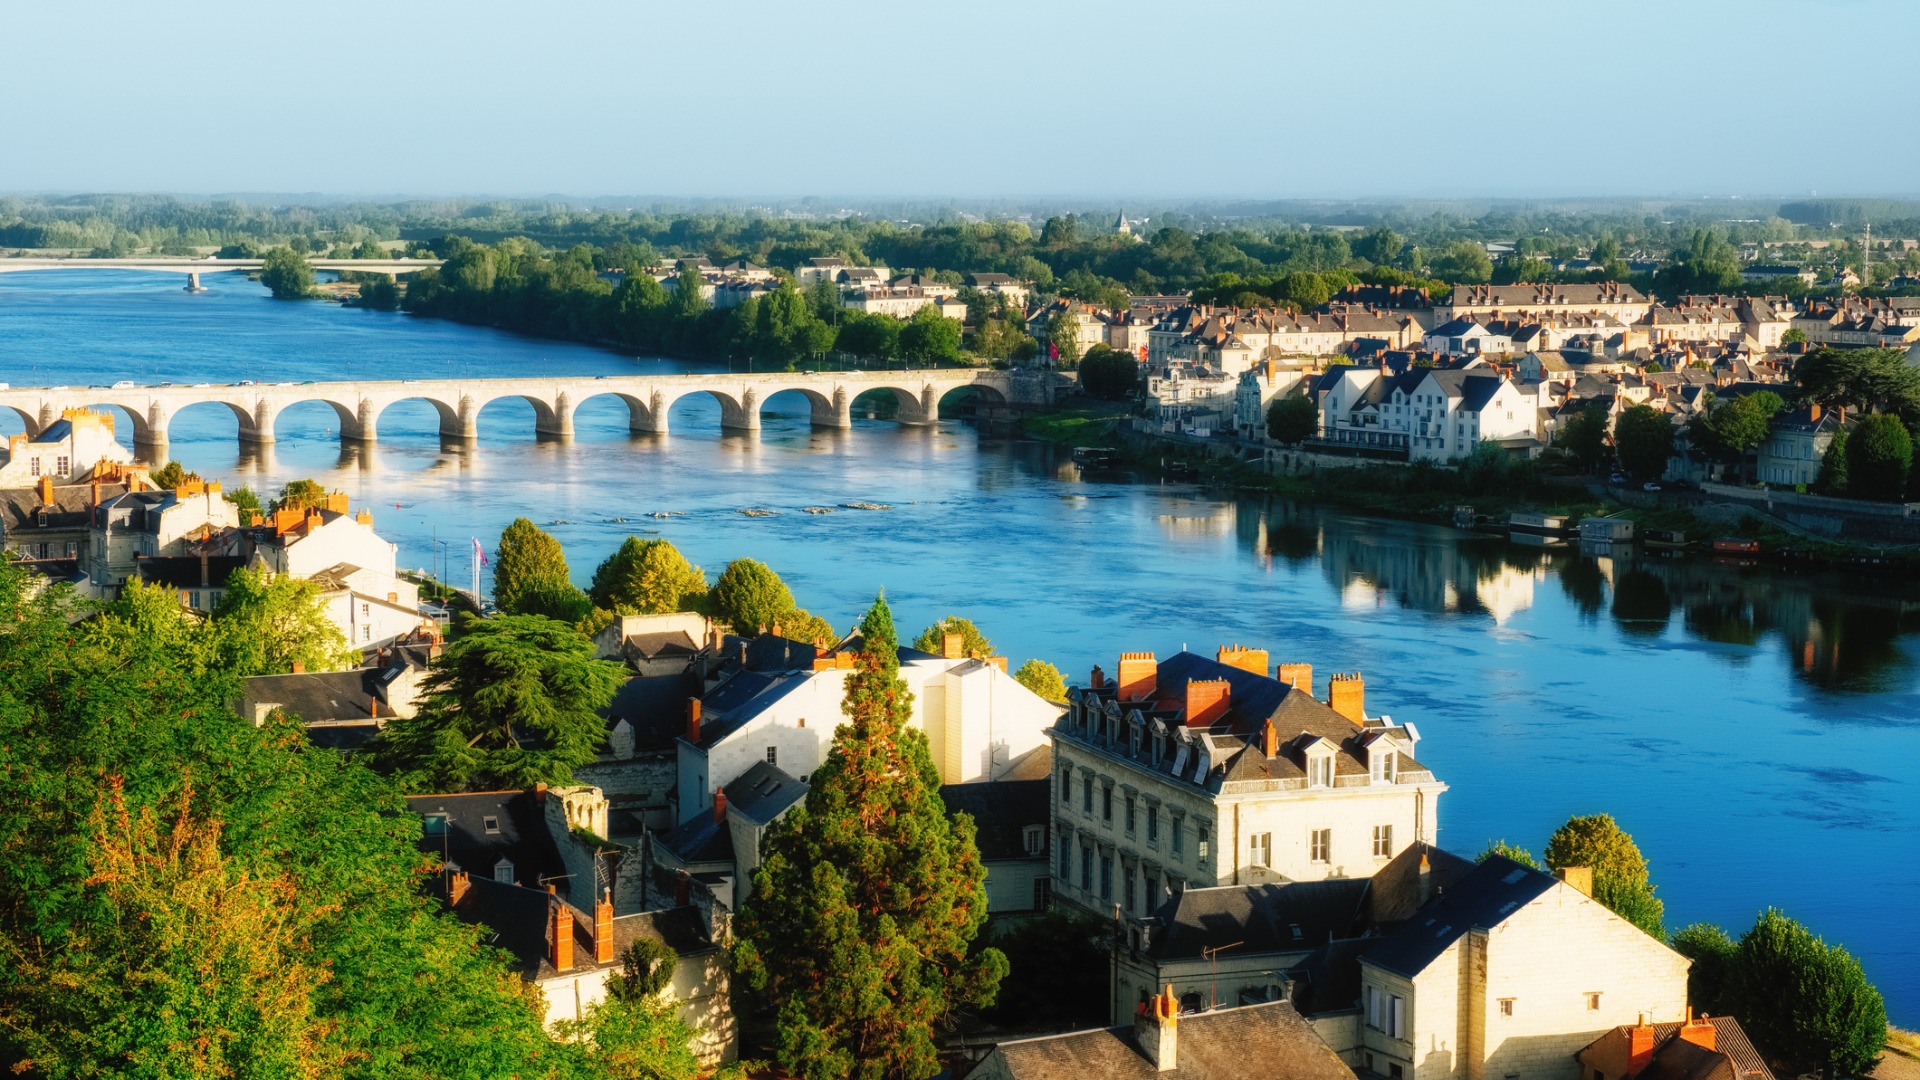 Photo - Gallery saumur loire river france picture id854725536